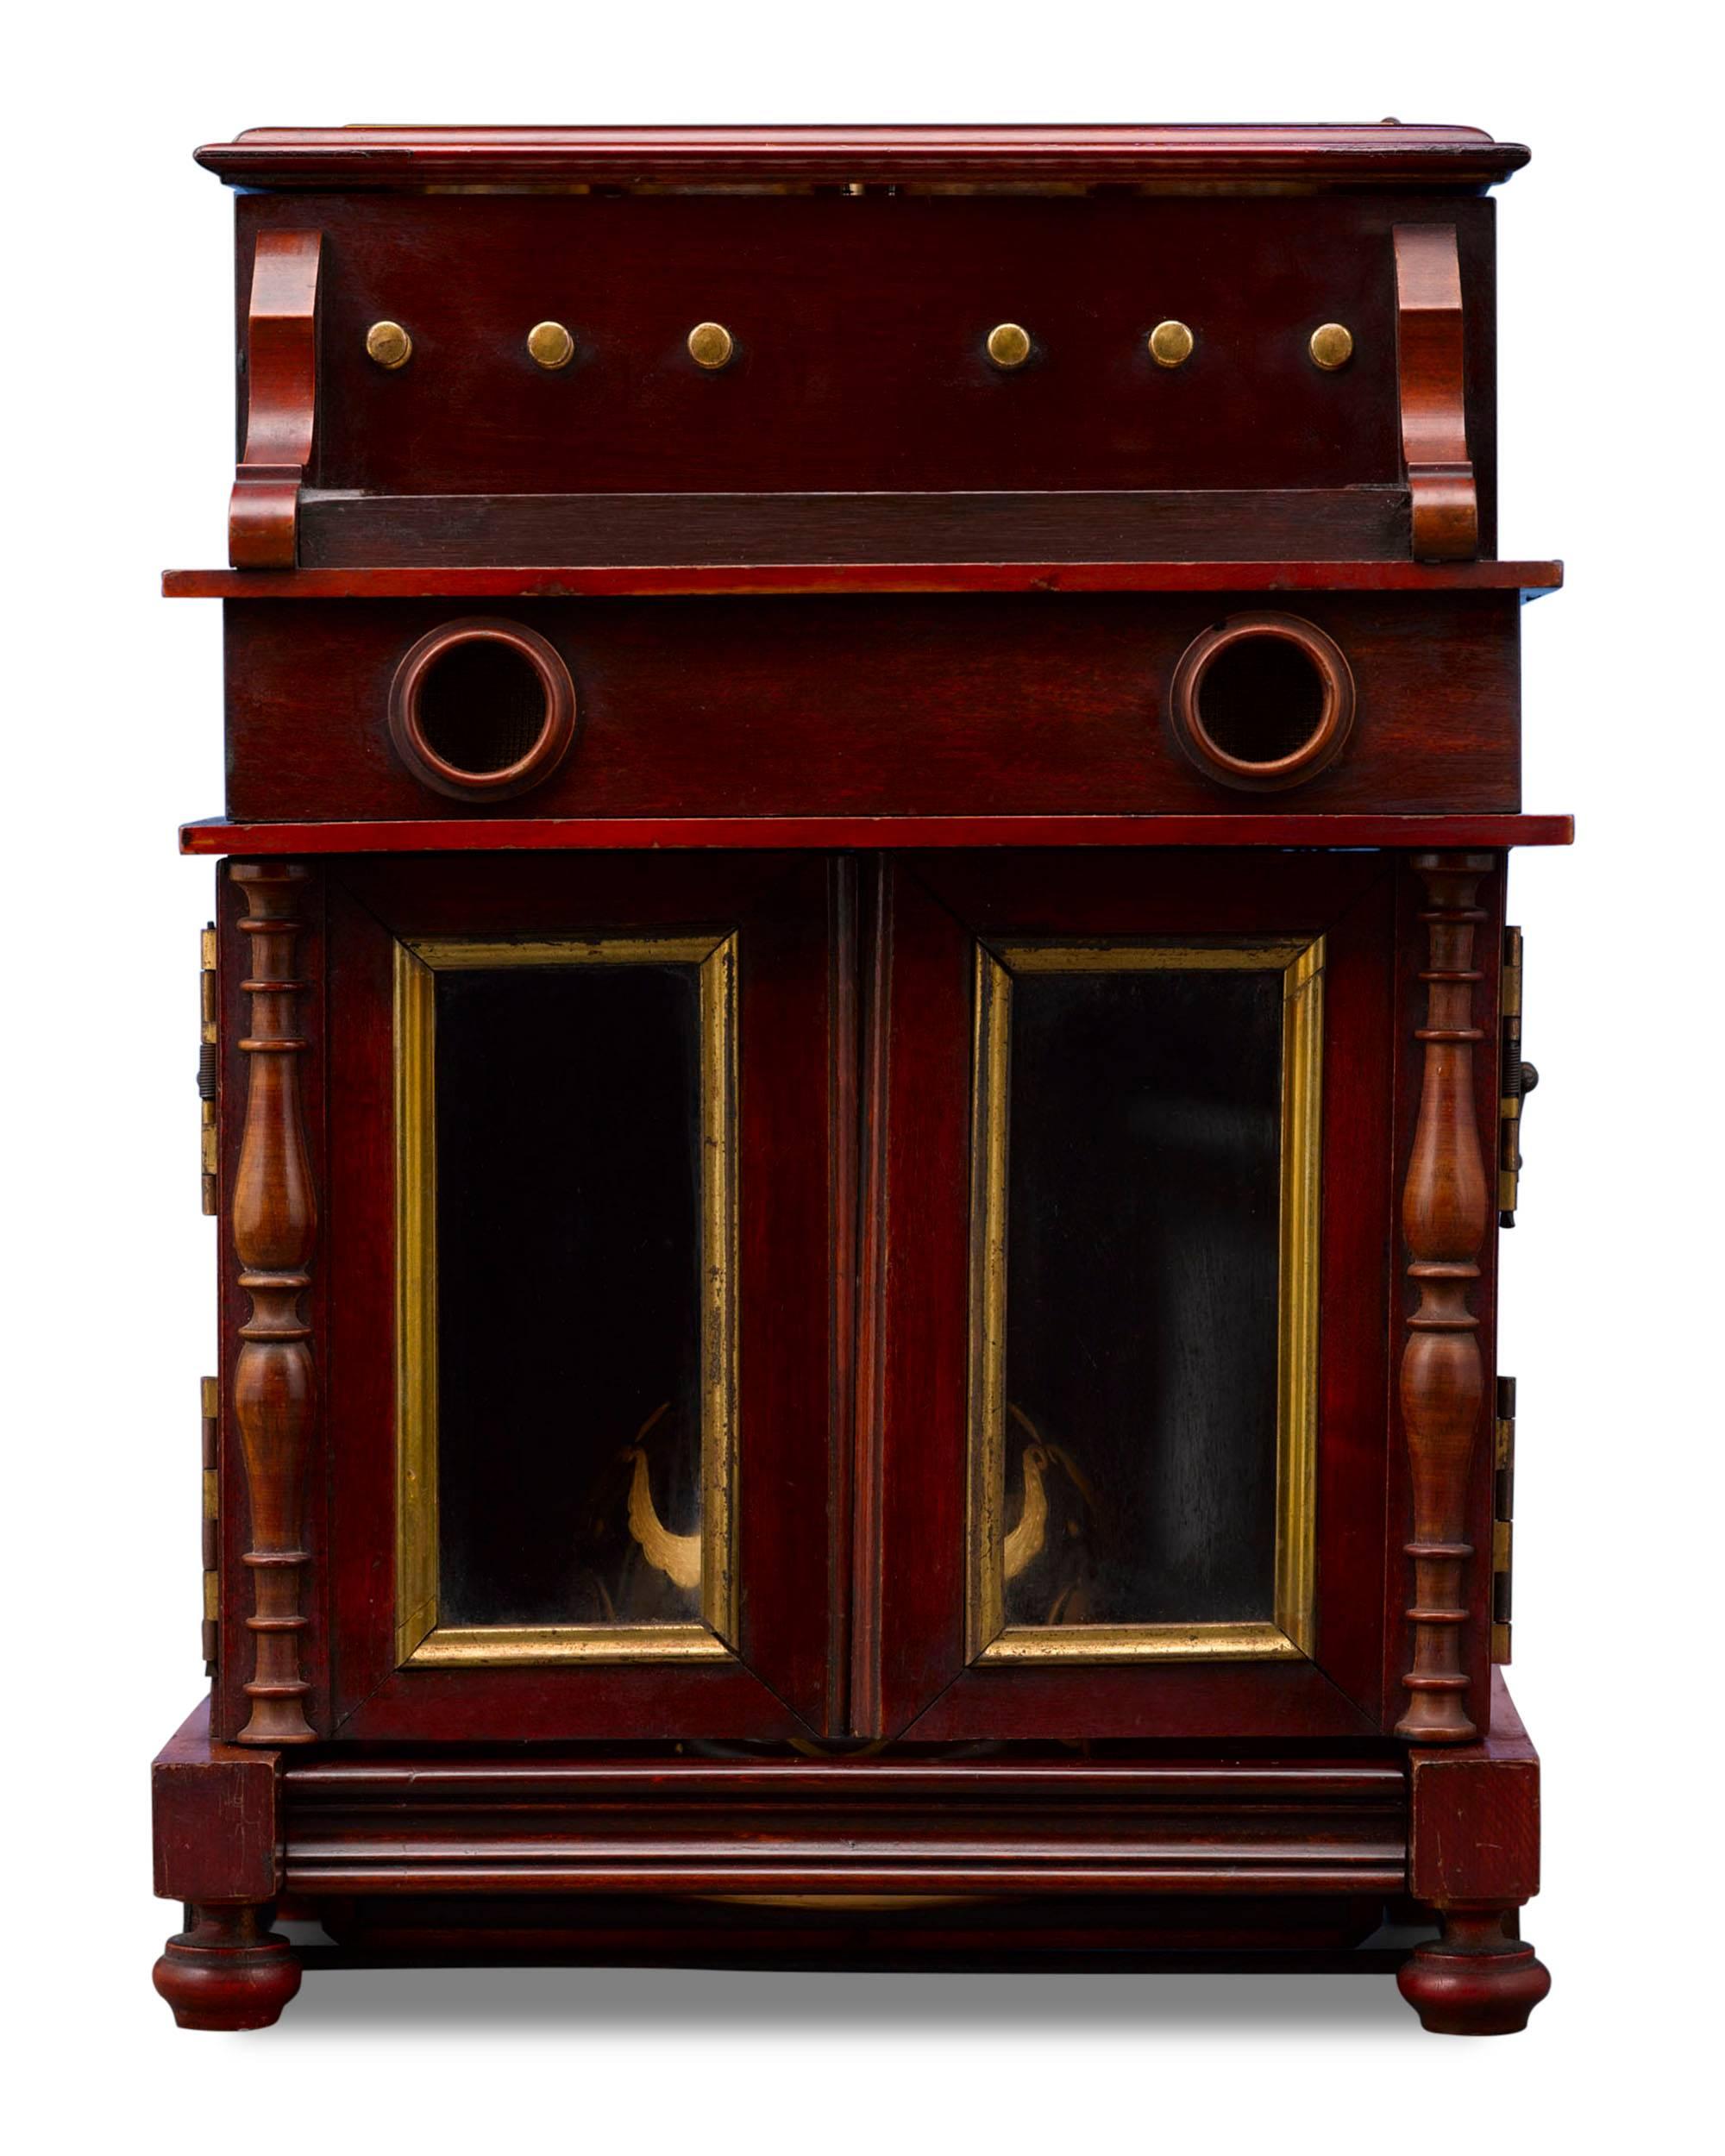 This rare and outstanding piano cave à liqueur provides both musical and liquid refreshment. Simply press the keyboard and one of two delightful airs from the hidden music box begins to play, causing the piano's glass panelled lid and doors to swing